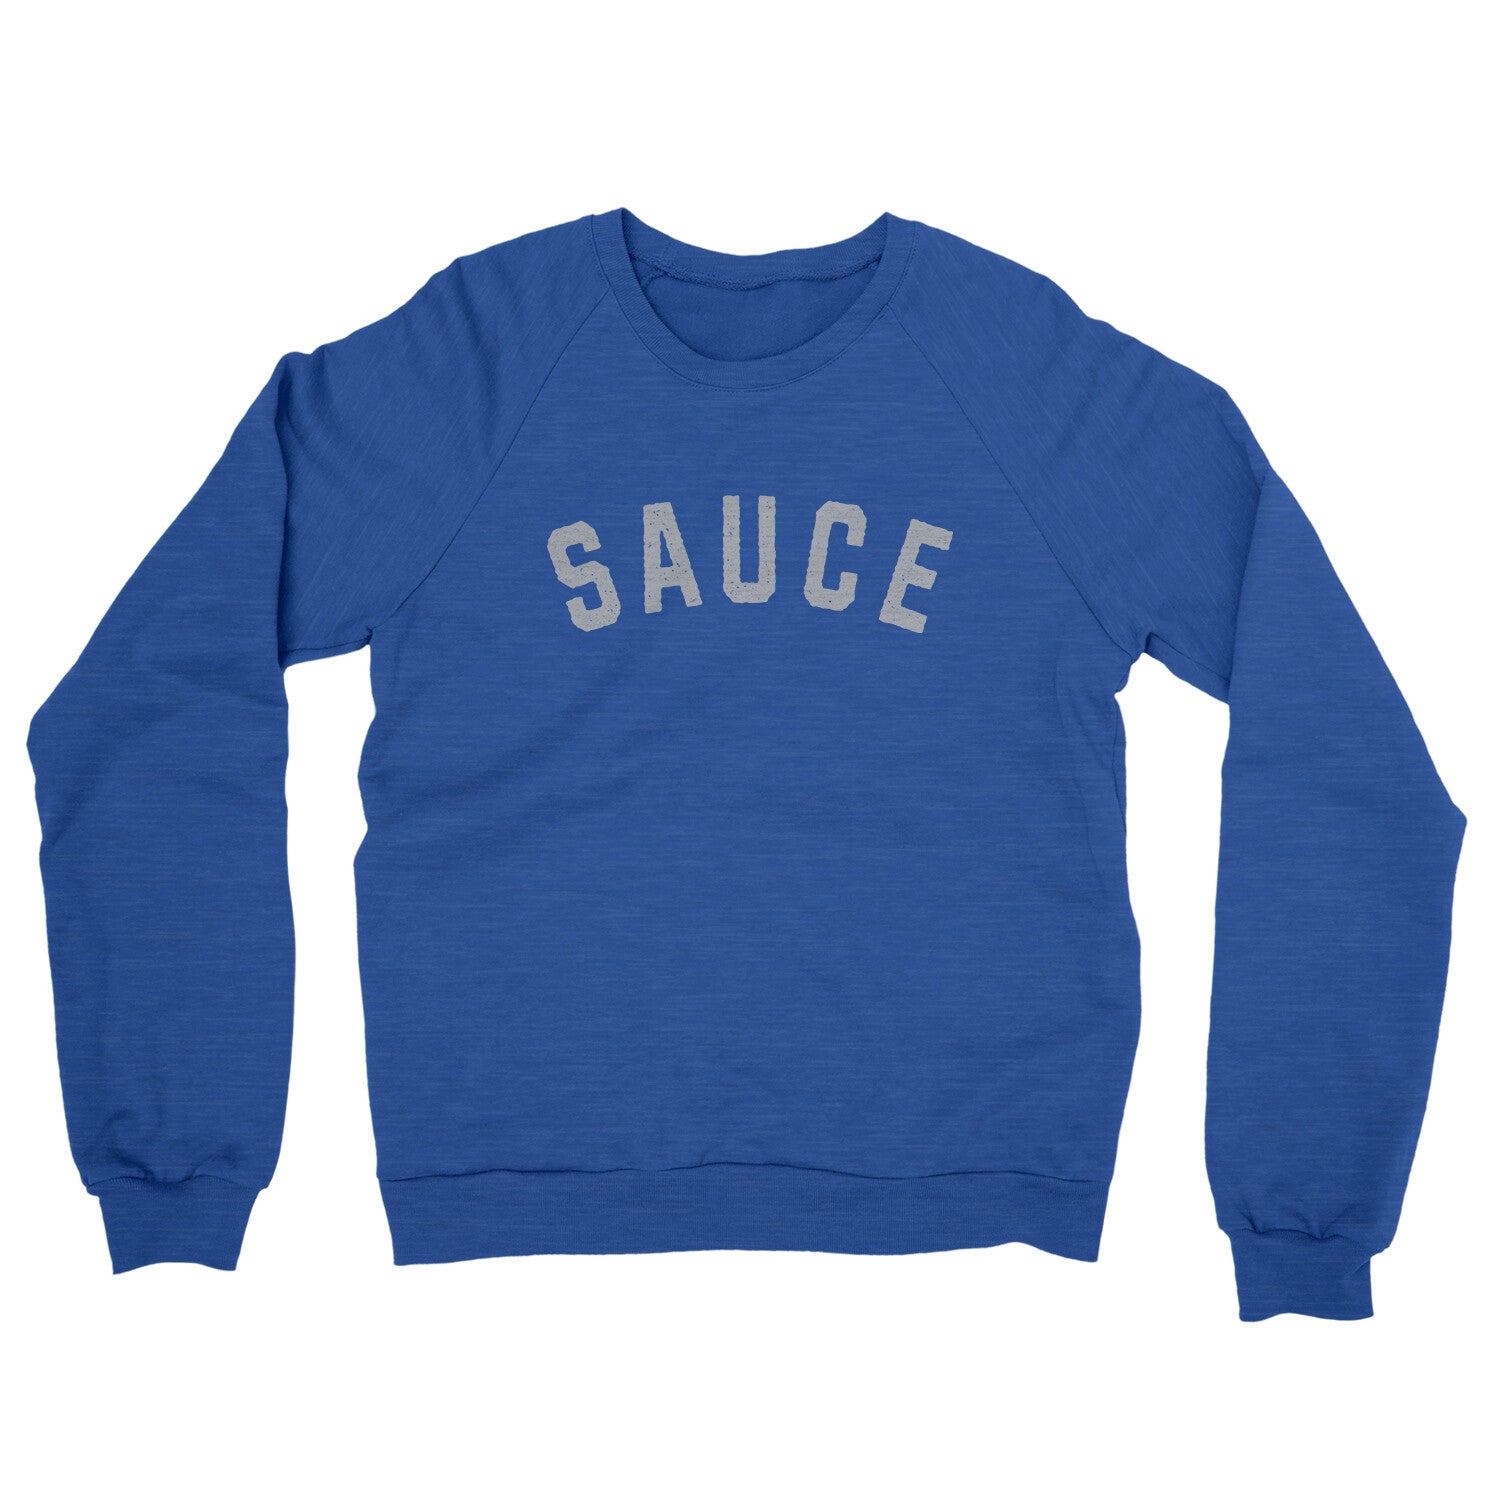 Sauce in Heather Royal Color